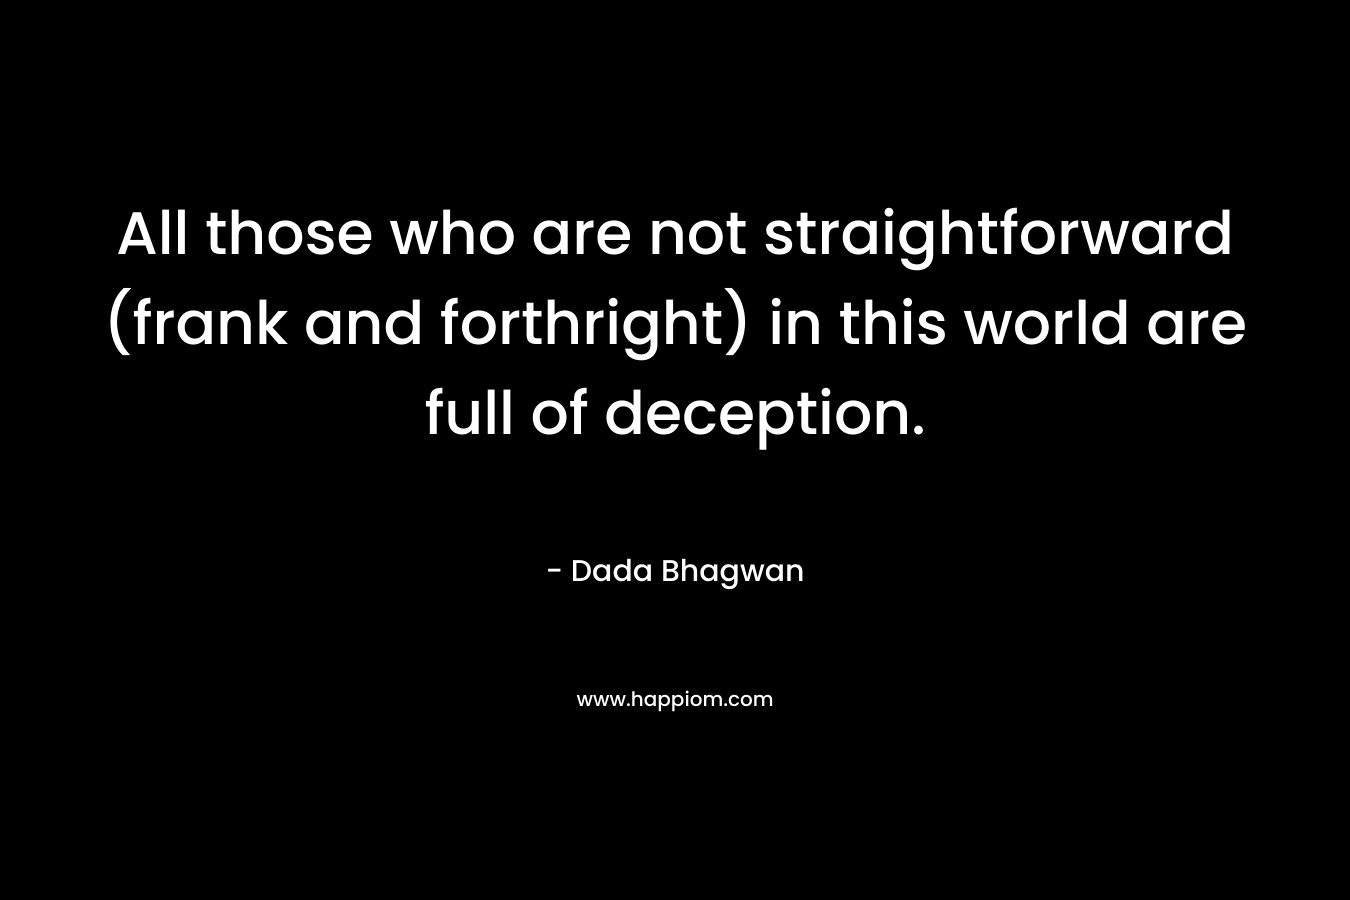 All those who are not straightforward (frank and forthright) in this world are full of deception.